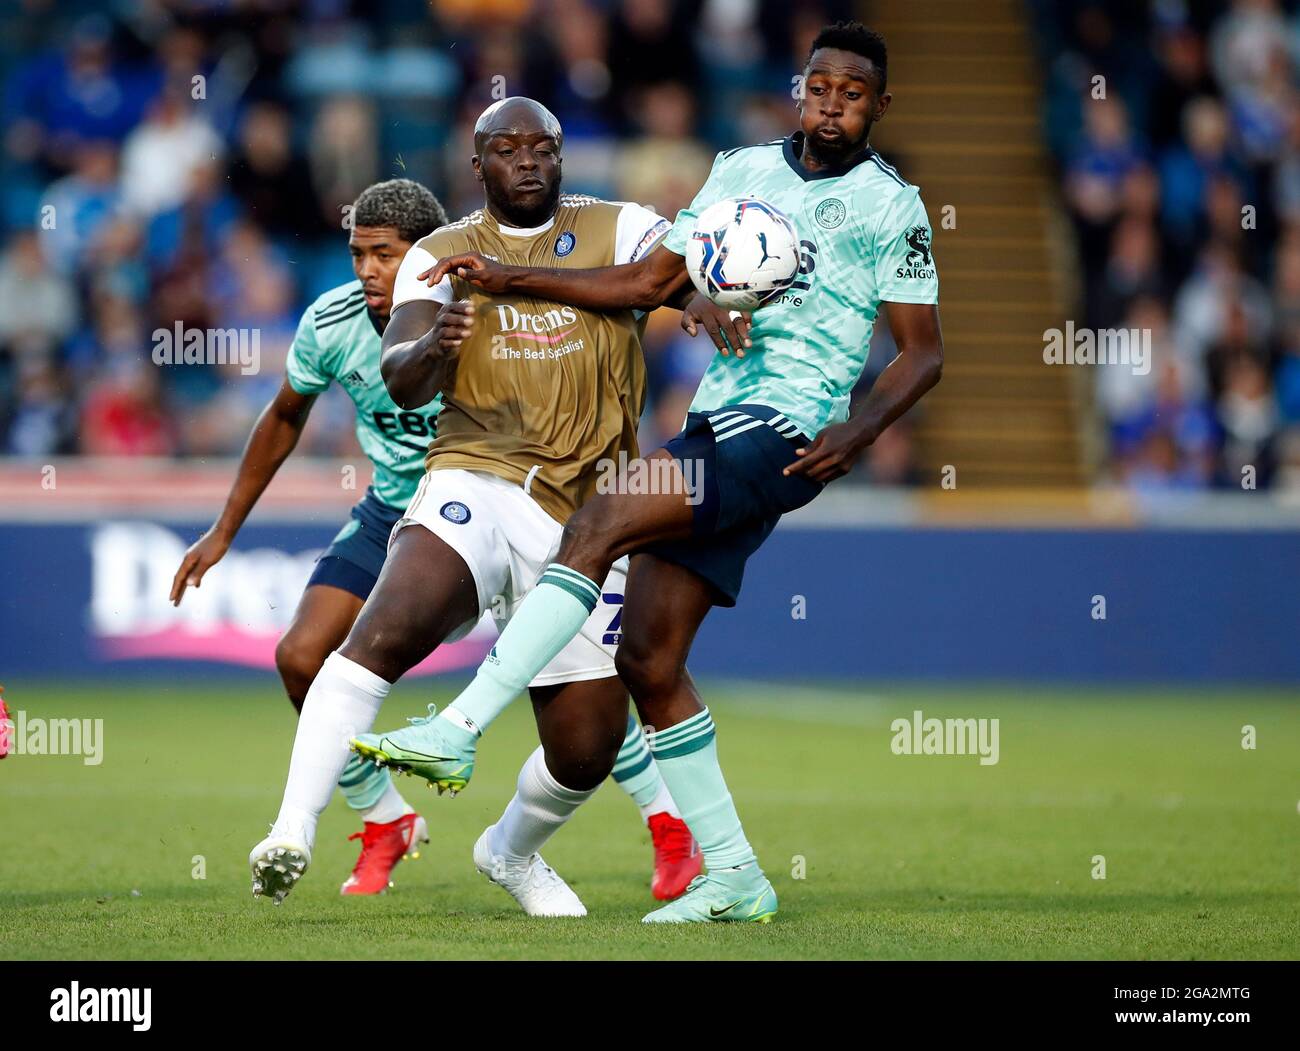 City leicester wycombe vs Wycombe Wanderers